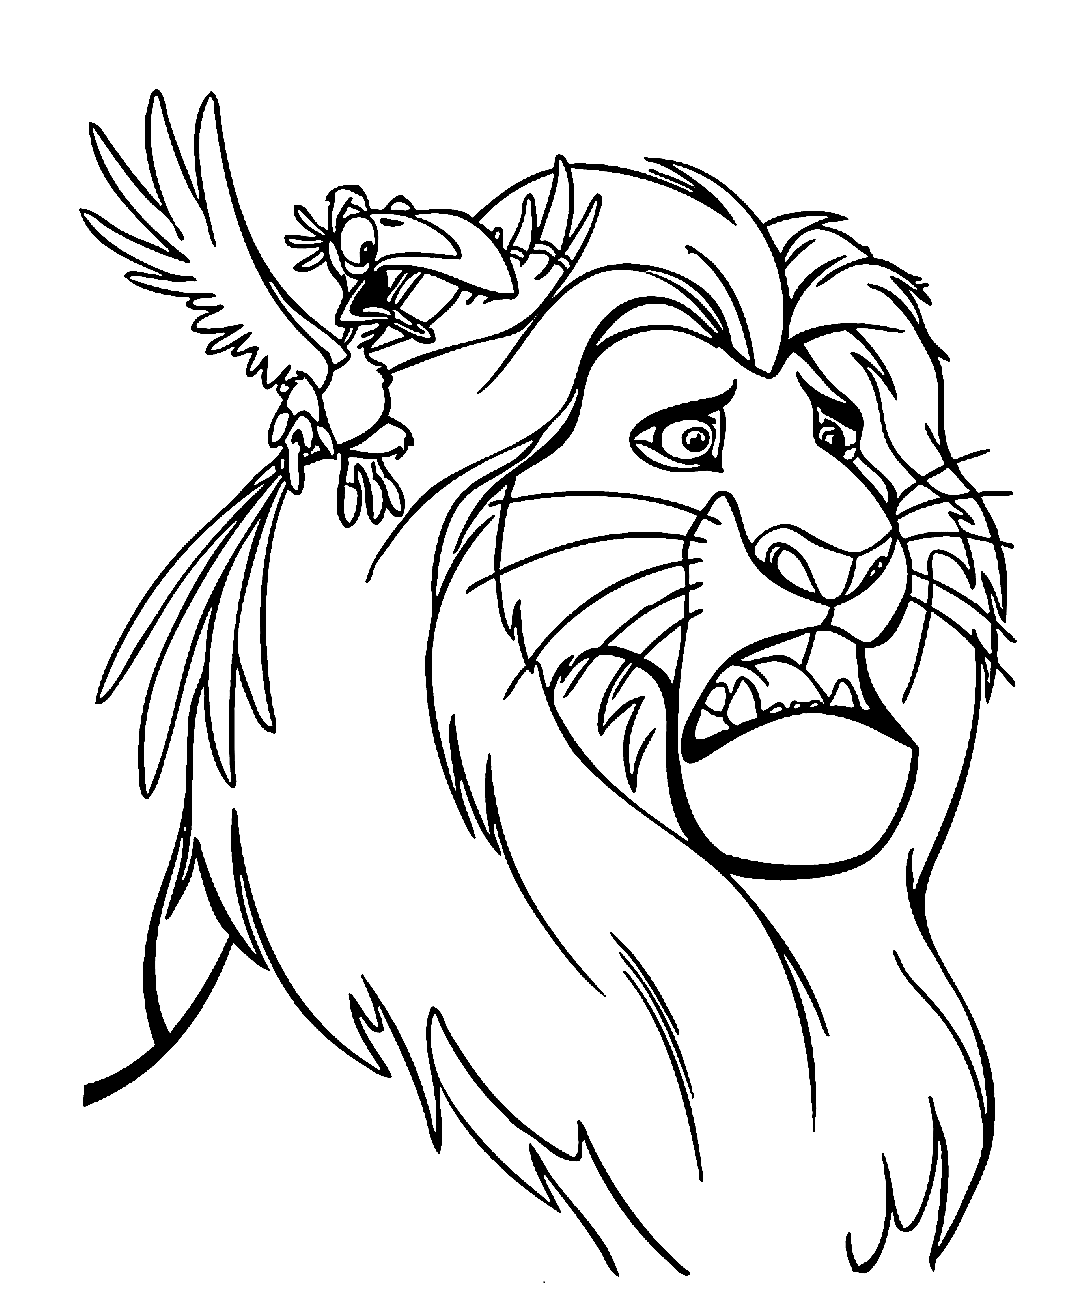 Lion King Coloring Pages